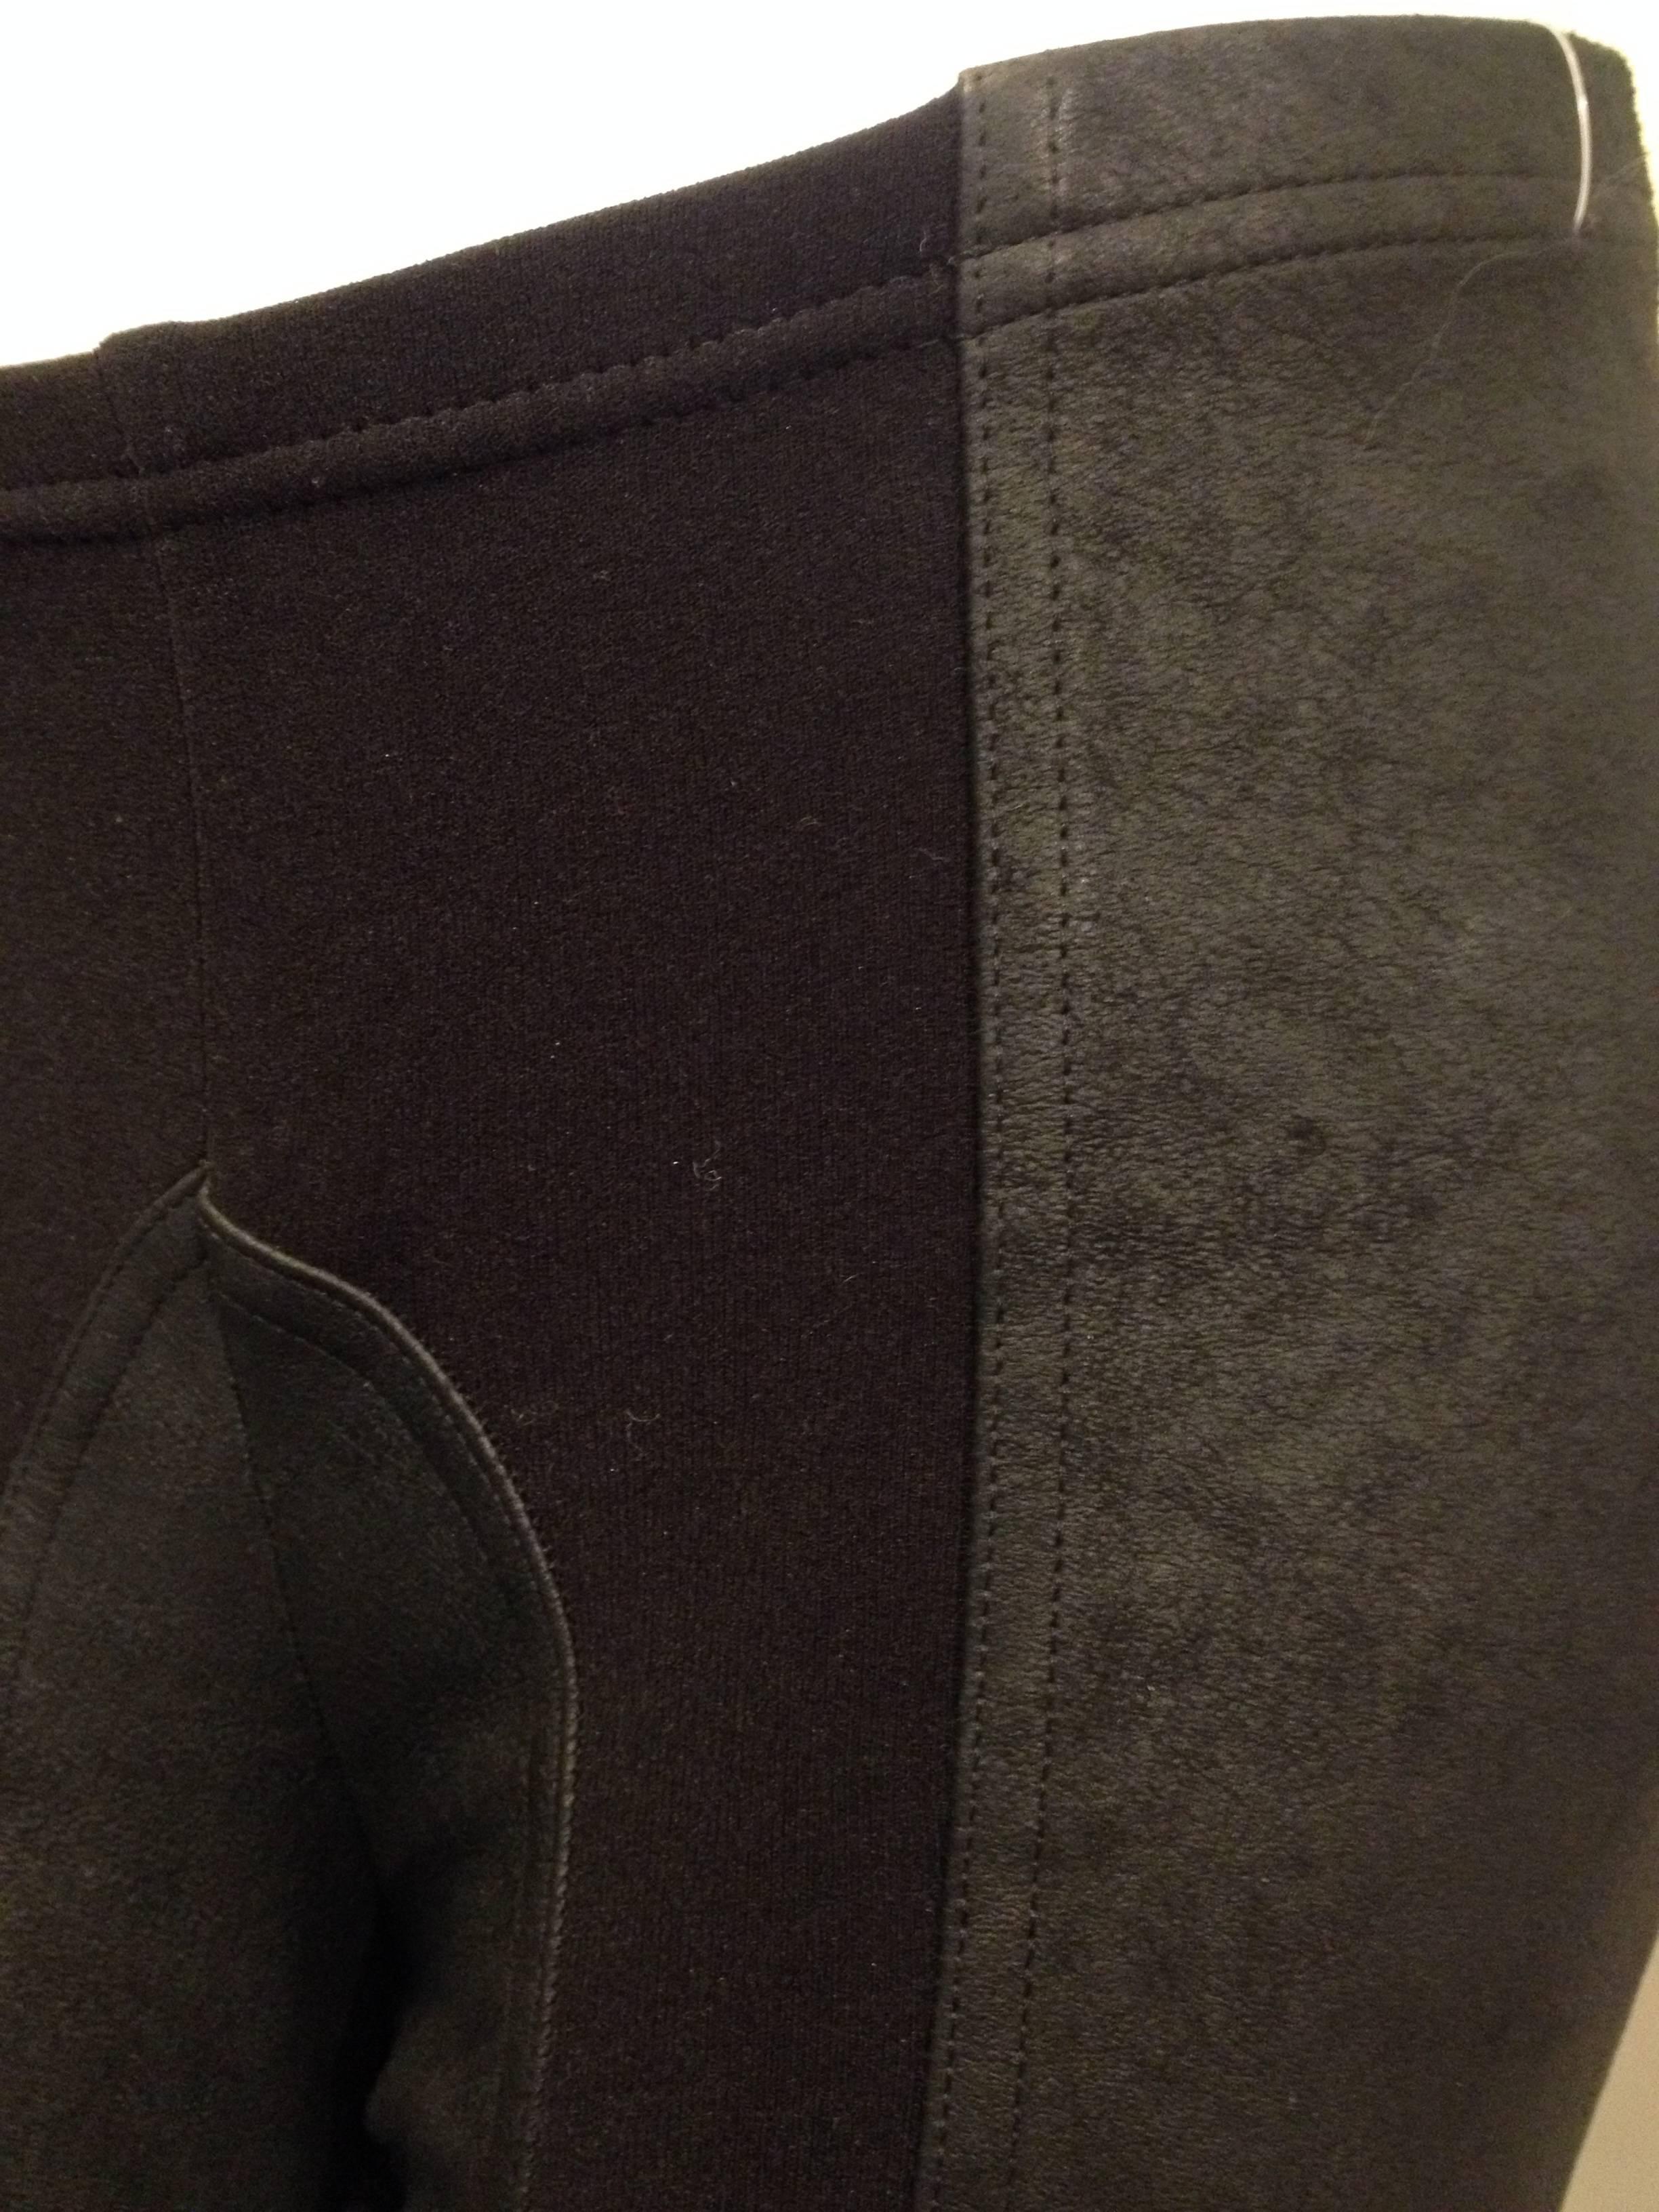 Rick Owens Black Leather Leggings In Excellent Condition For Sale In San Francisco, CA